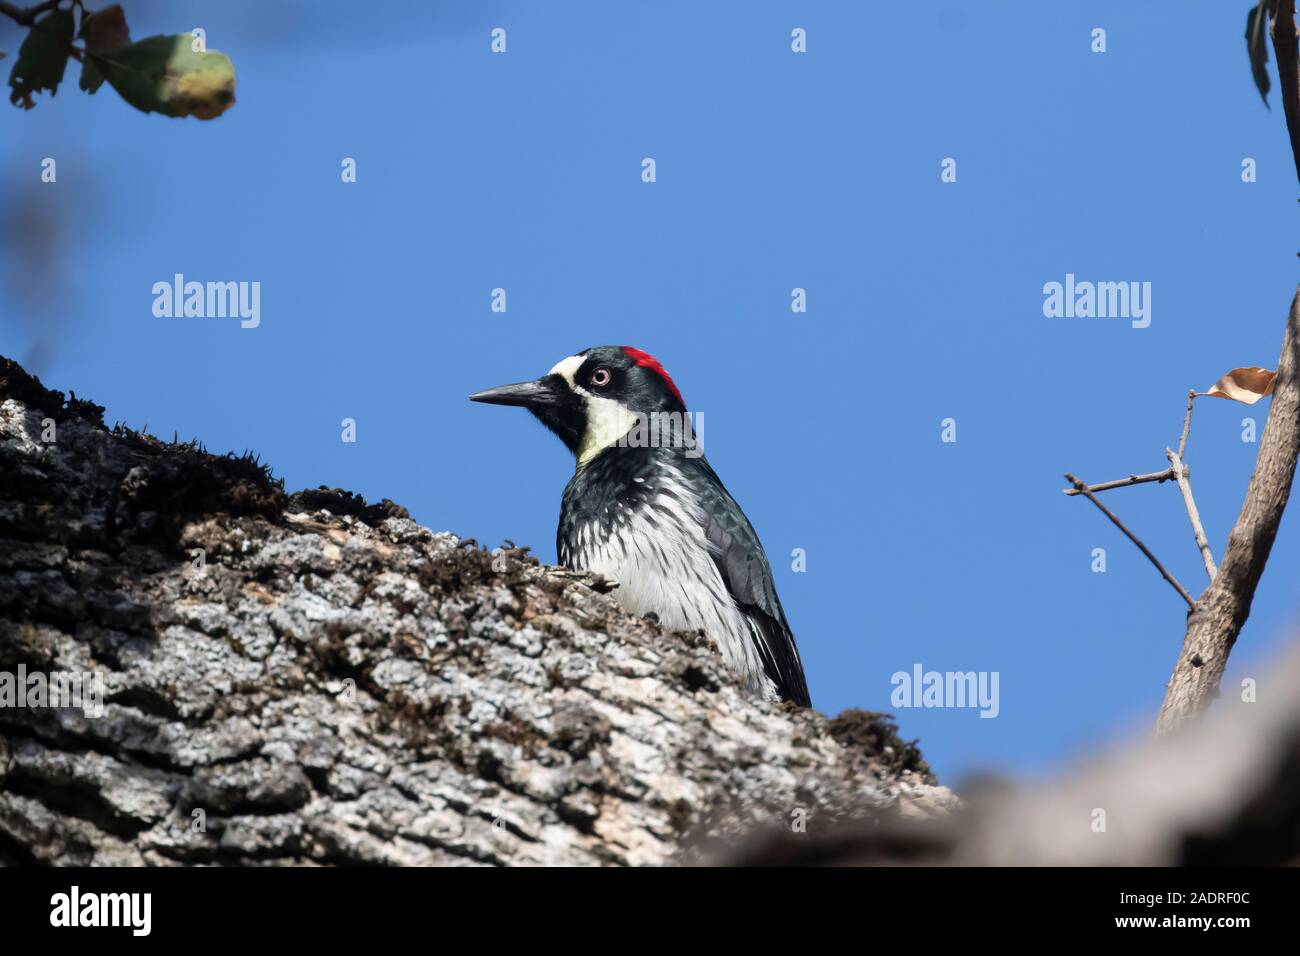 Acorn Woodpecker, Melanerpes formicivorus, female on Blue Oak, Quercus douglasii, in Potishwa Campground in the foothills of Sequoia National Park, Ca Stock Photo